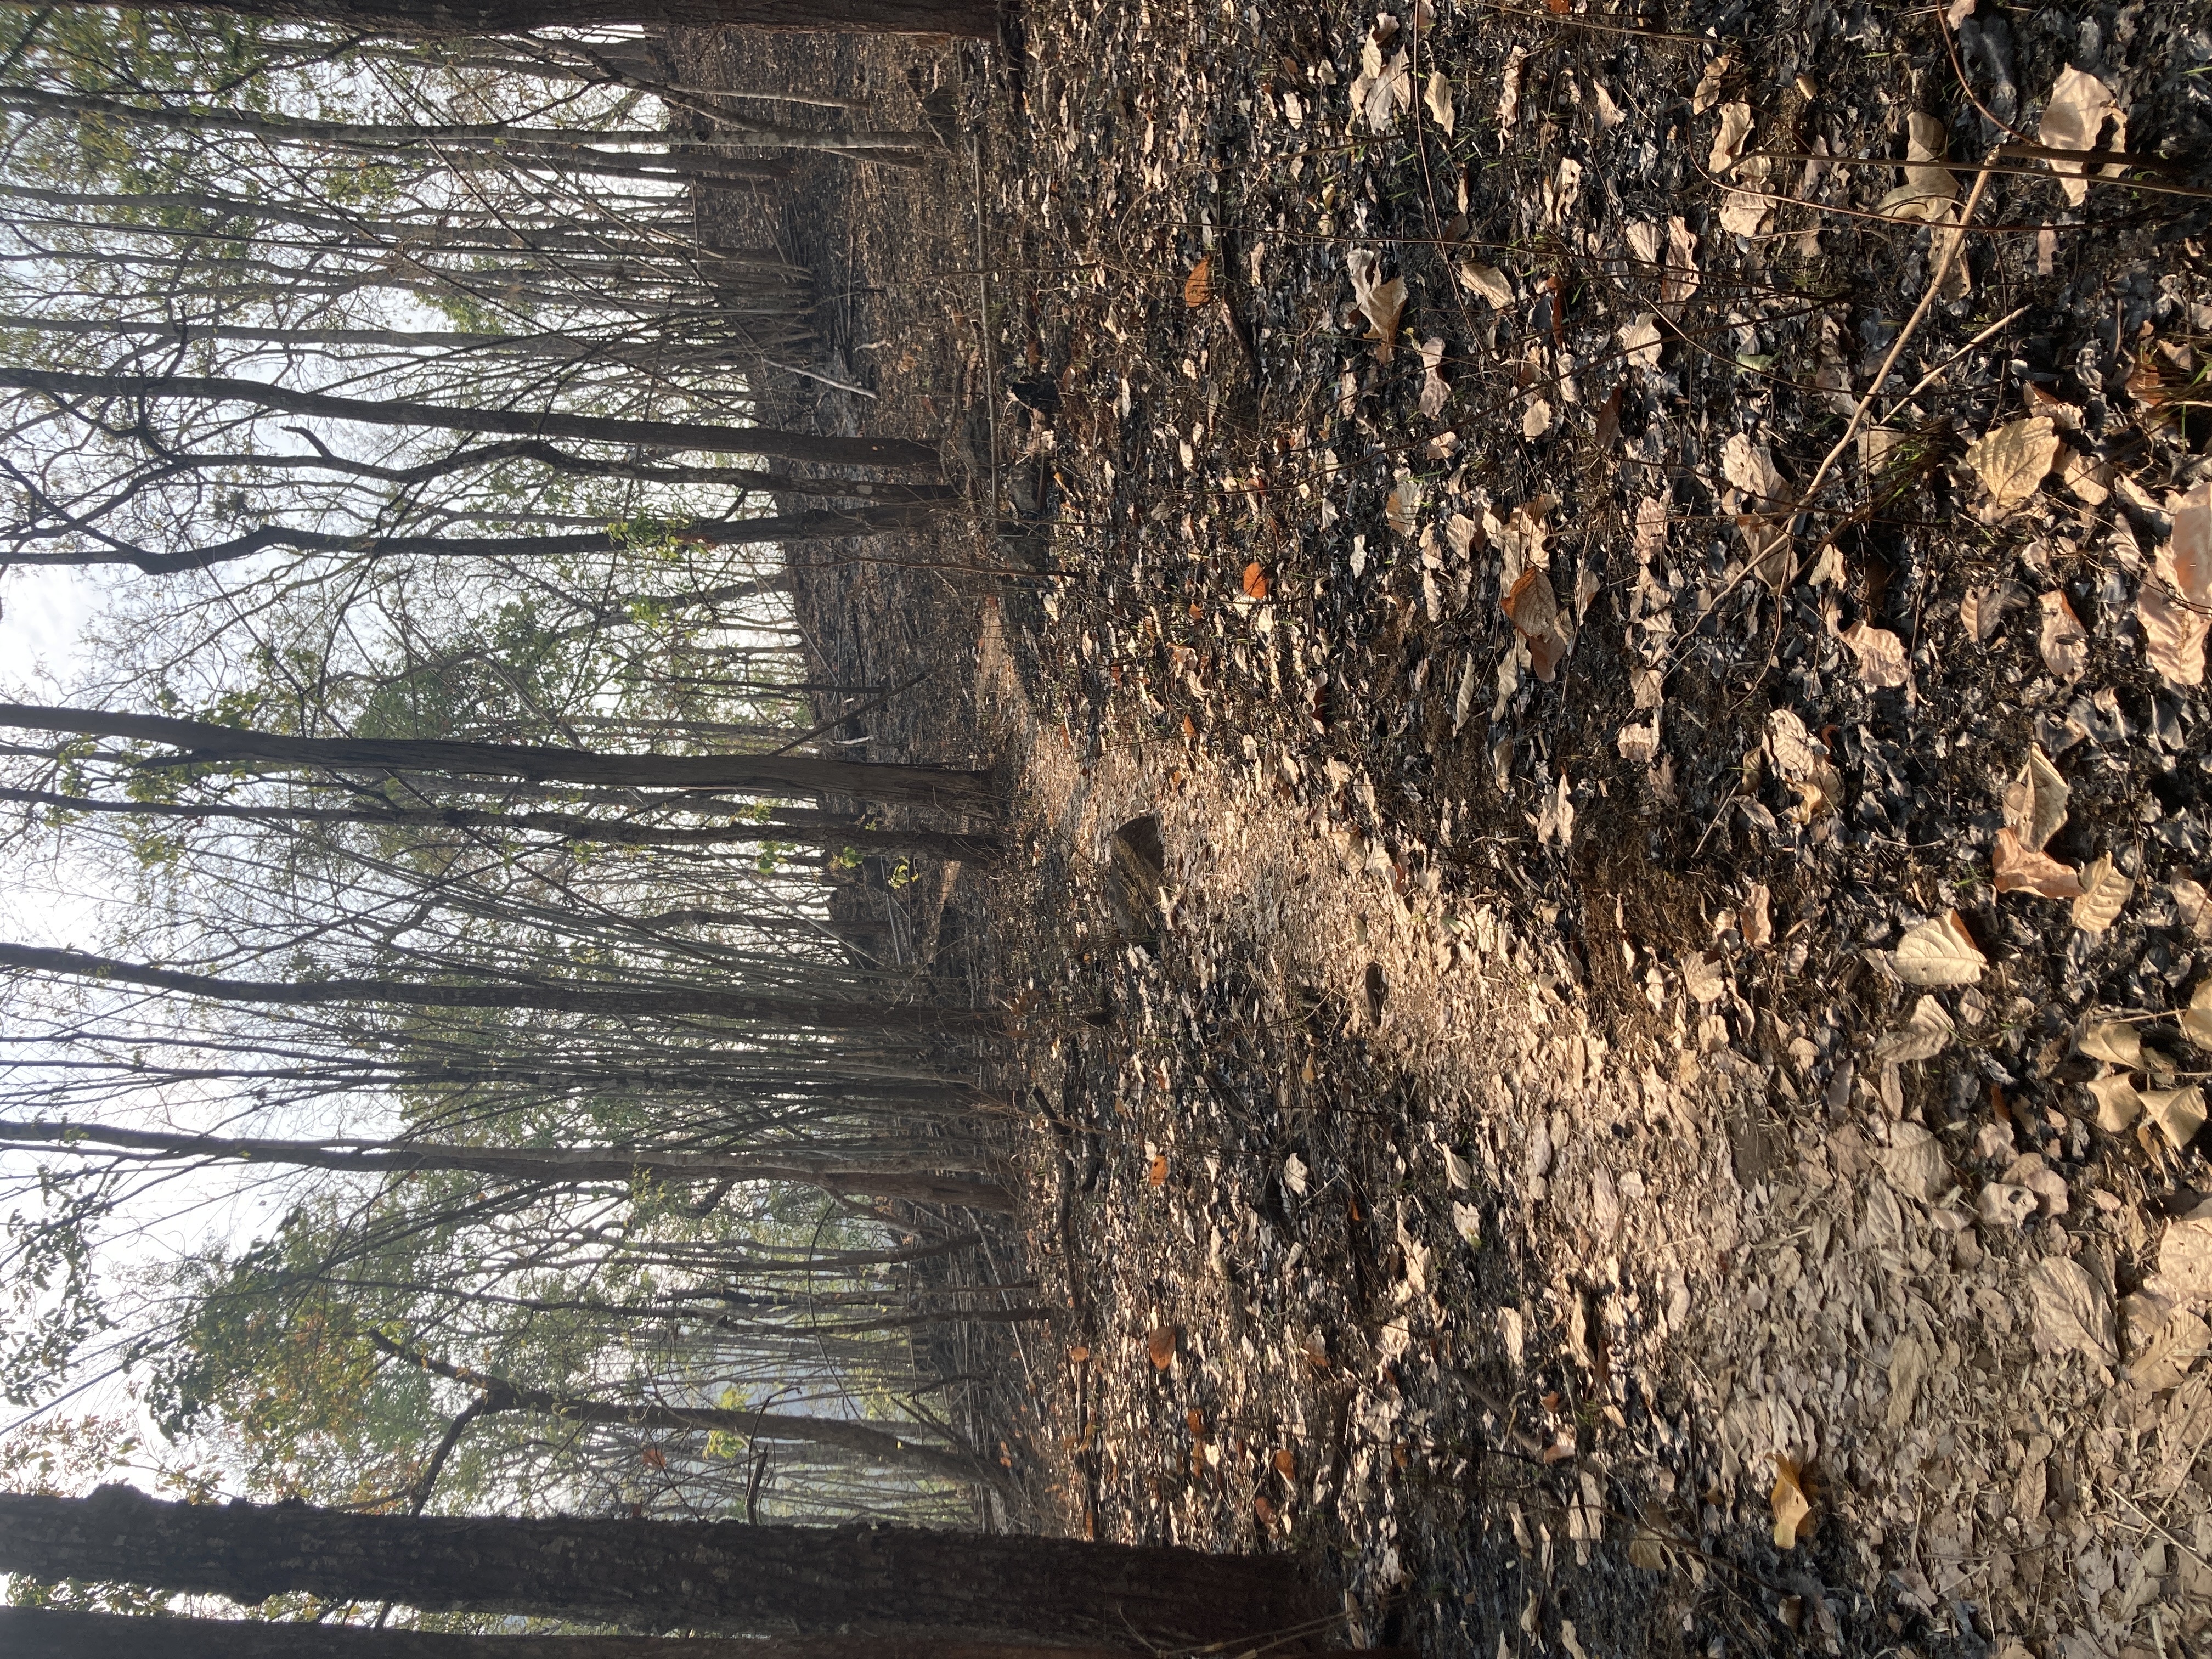 The trail going through the jungle, which has been destroyed by wildfires